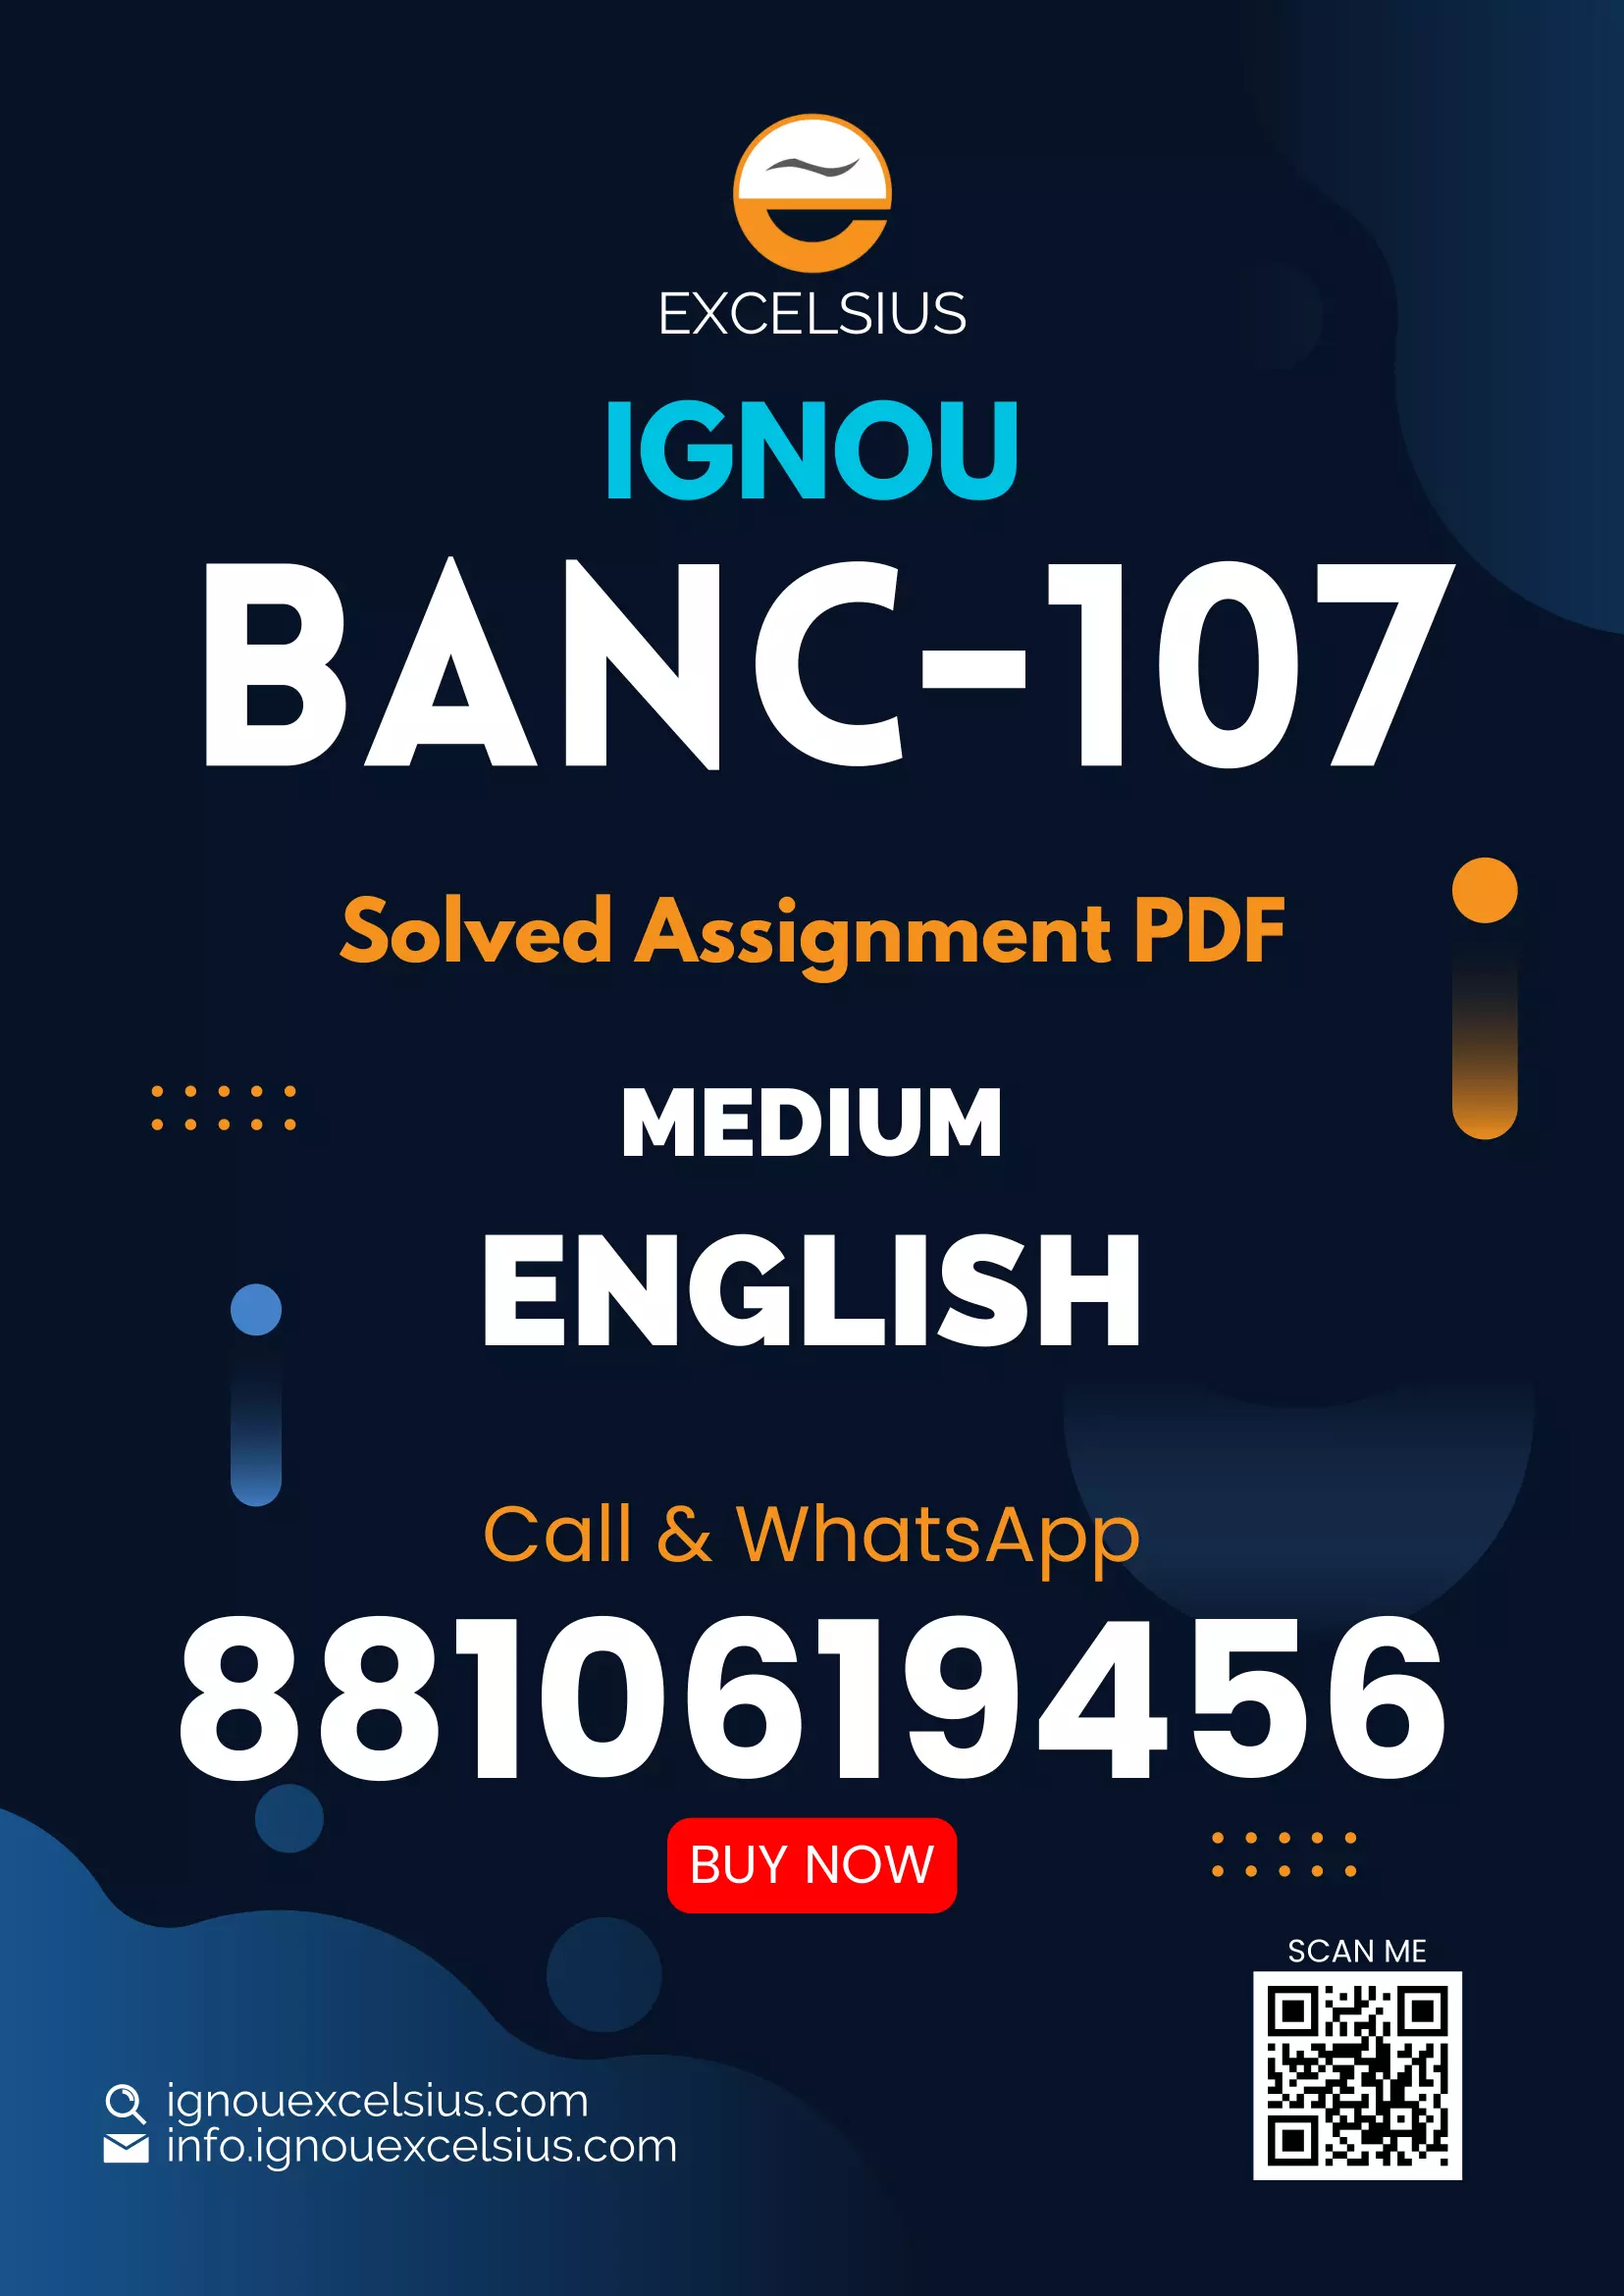 IGNOU BANC-107 - Biological Diversity in Human Populations, Latest Solved Assignment -July 2022 – January 2023